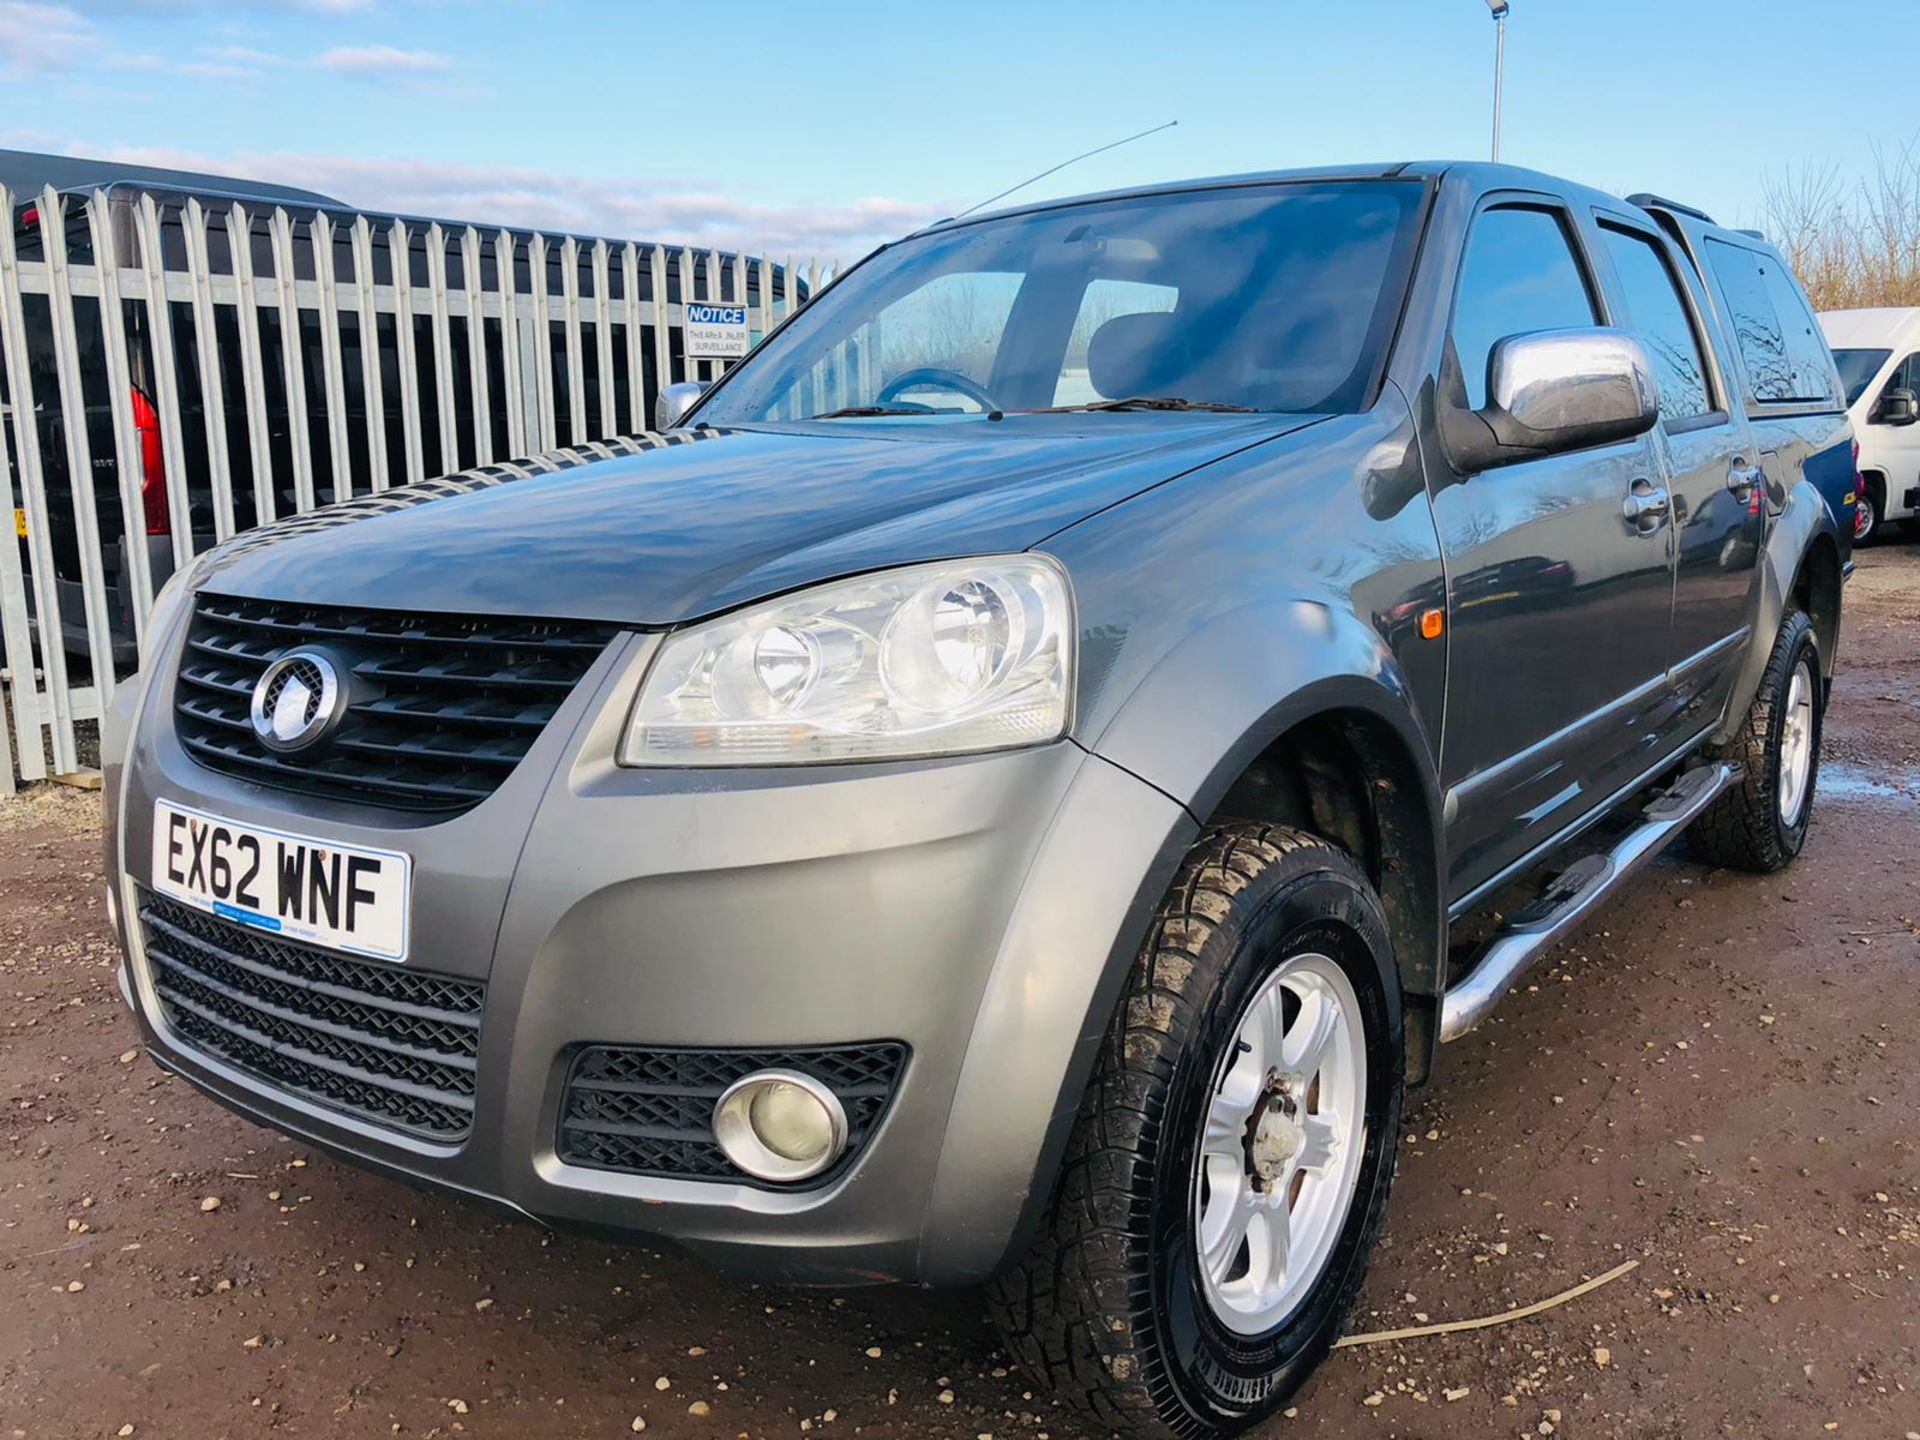 Great Wall Steed 2.0 TD 143 SE ( Special Equipment ) 4x4 Double Cab 2013 '62 Reg' - Image 4 of 24